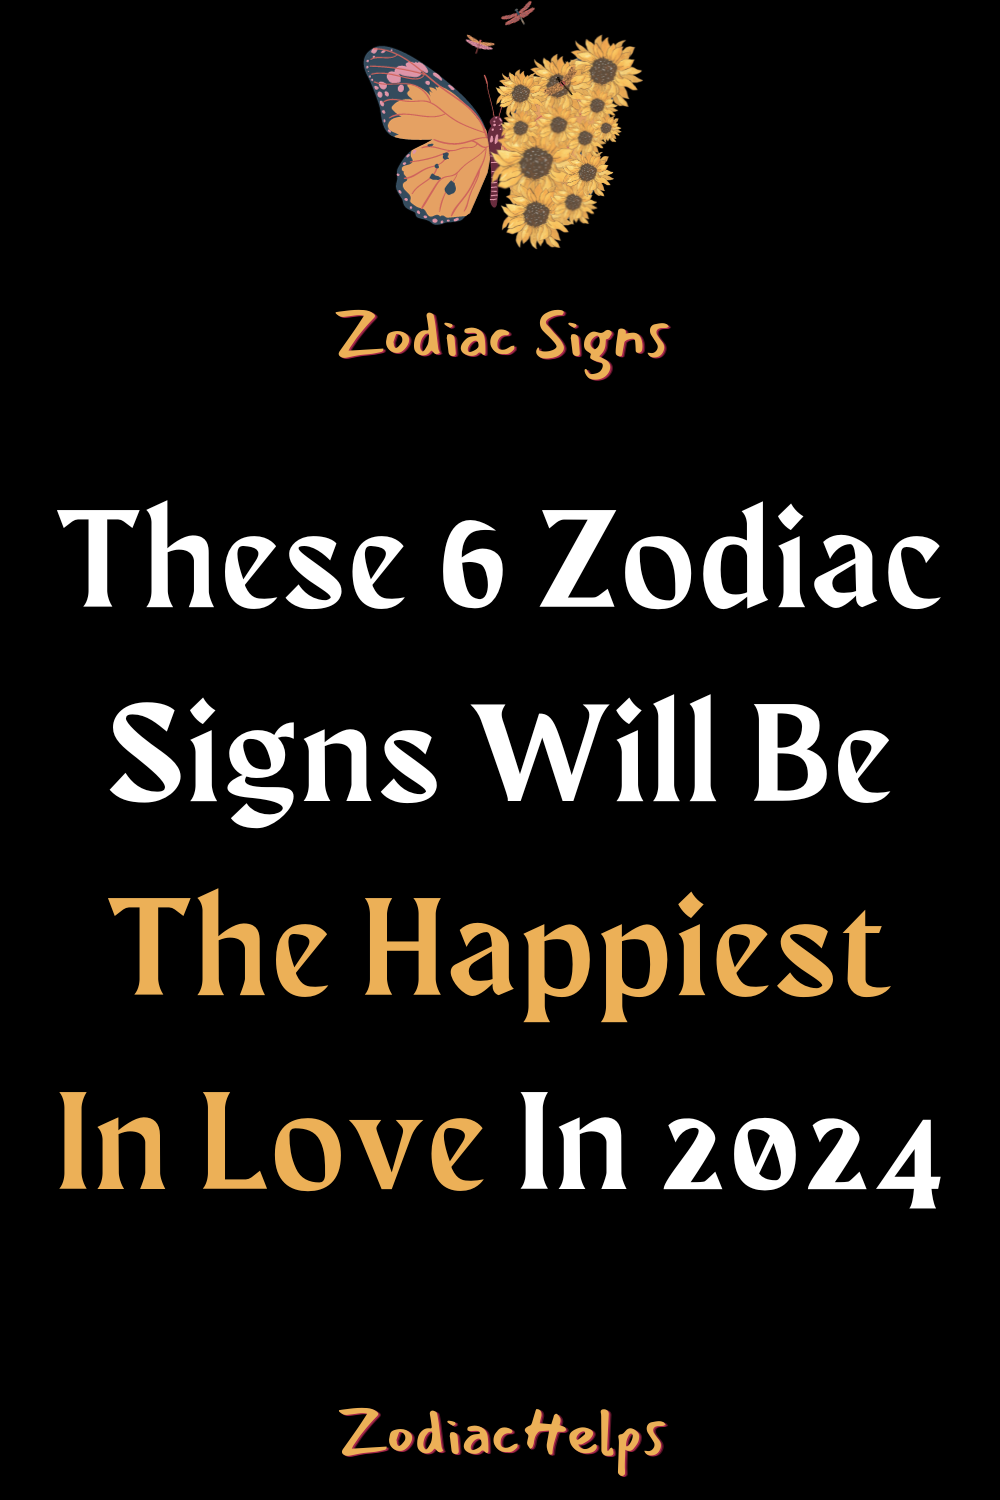 These 6 Zodiac Signs Will Be The Happiest In Love In 2024